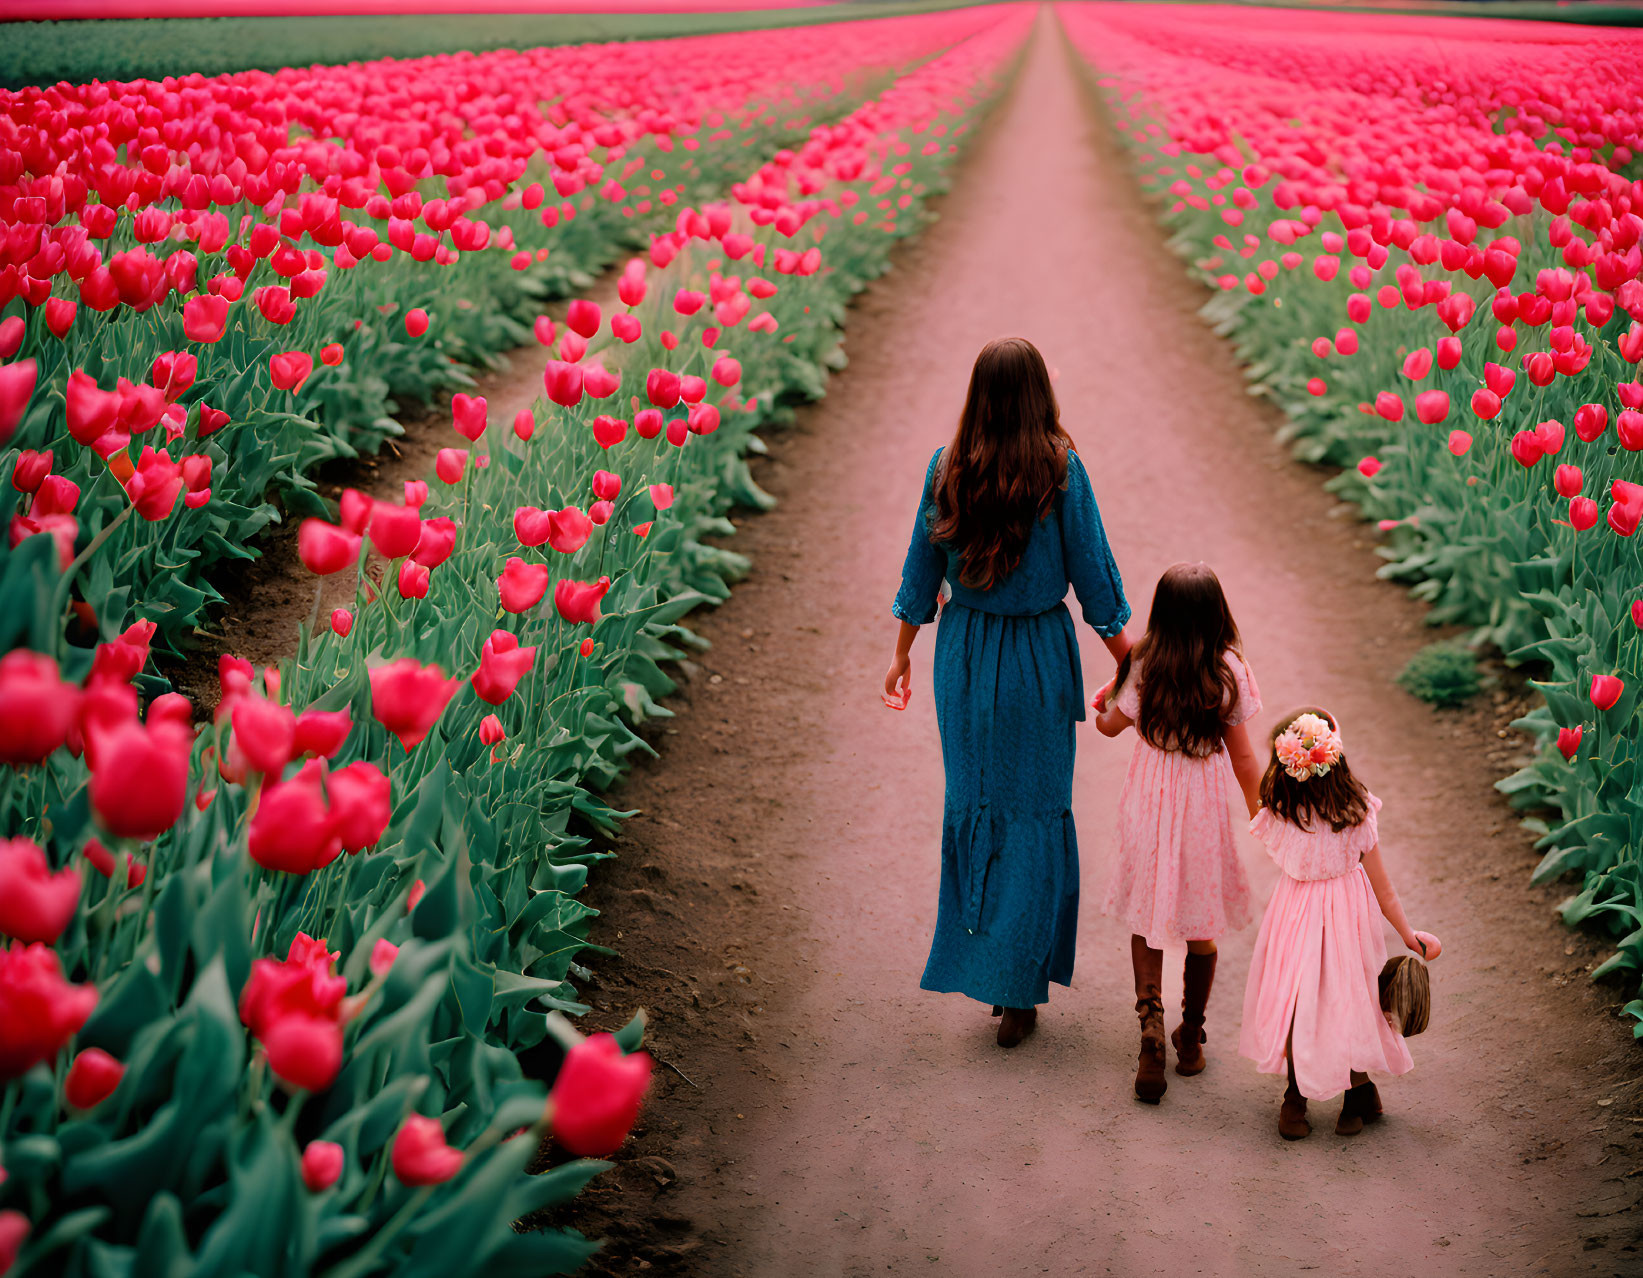 Two girls walking hand in hand among red tulips in blue and pink dresses